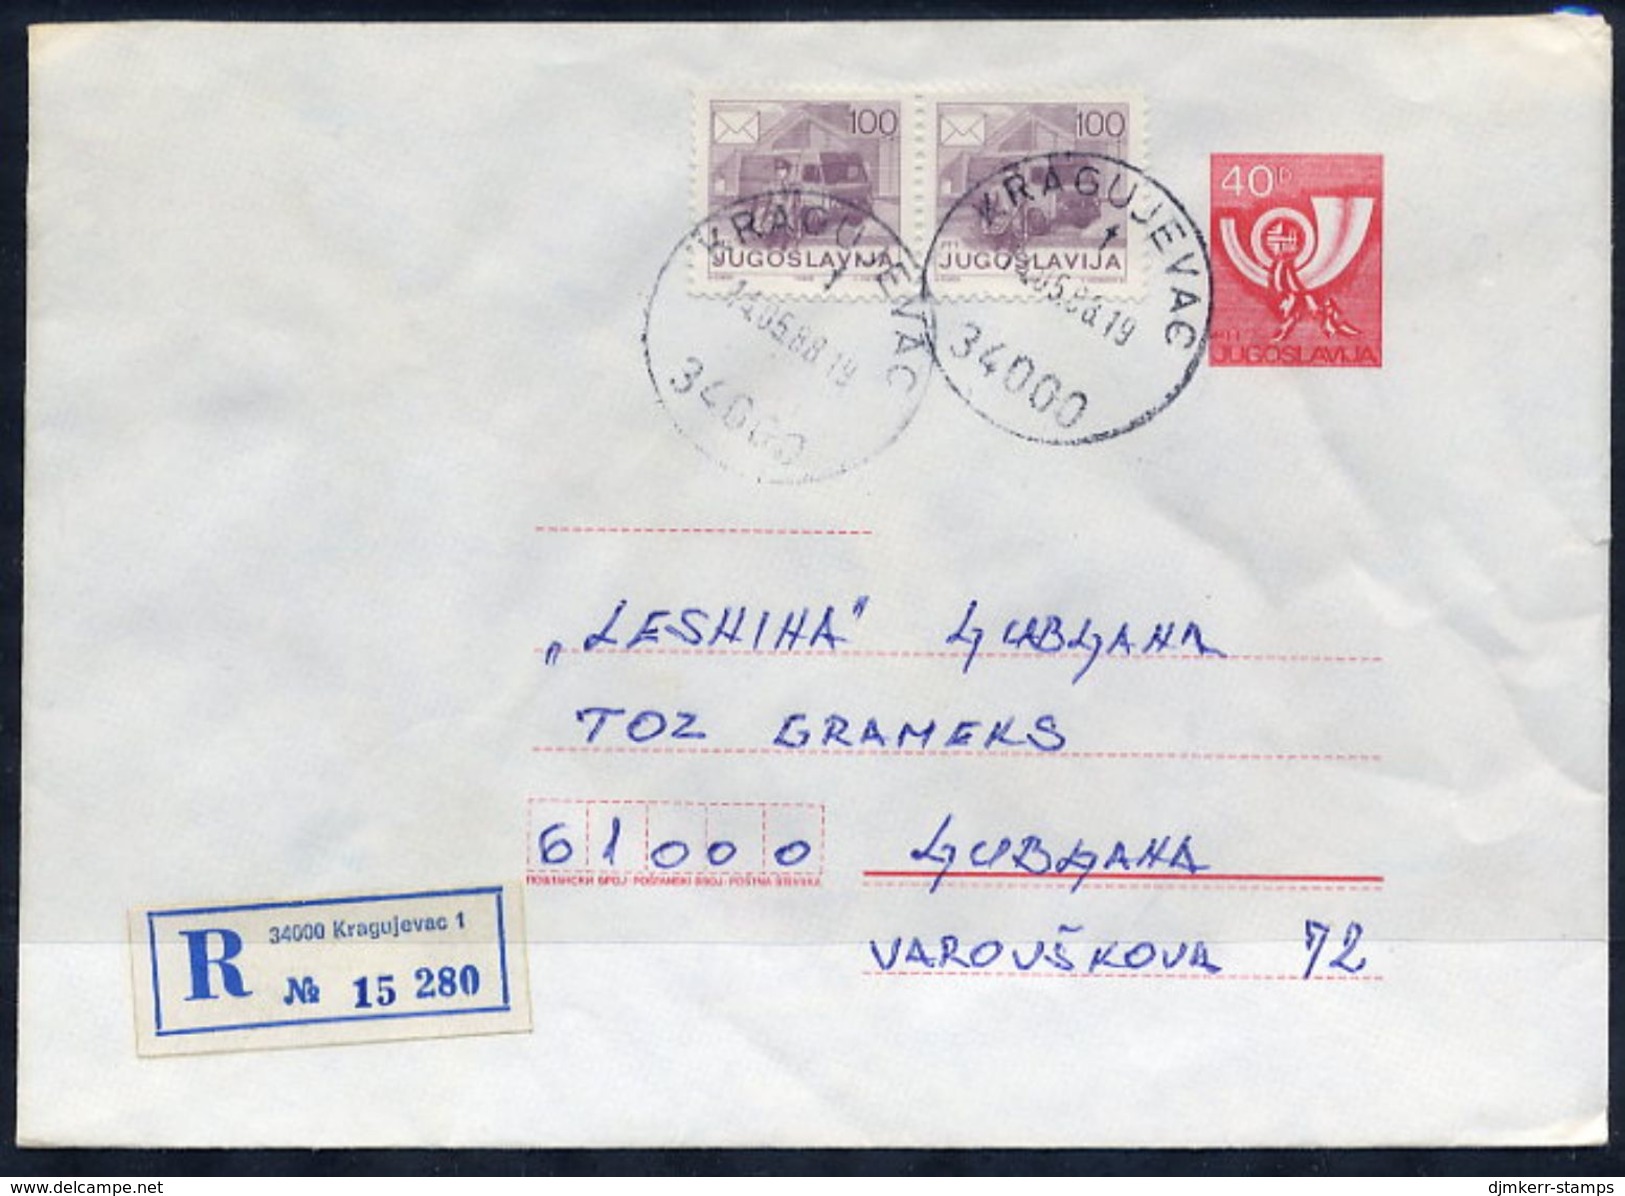 YUGOSLAVIA 1986 Posthorn 40 D.stationery Envelope Format B With  Used With Additional Franking.  Michel U76B - Entiers Postaux